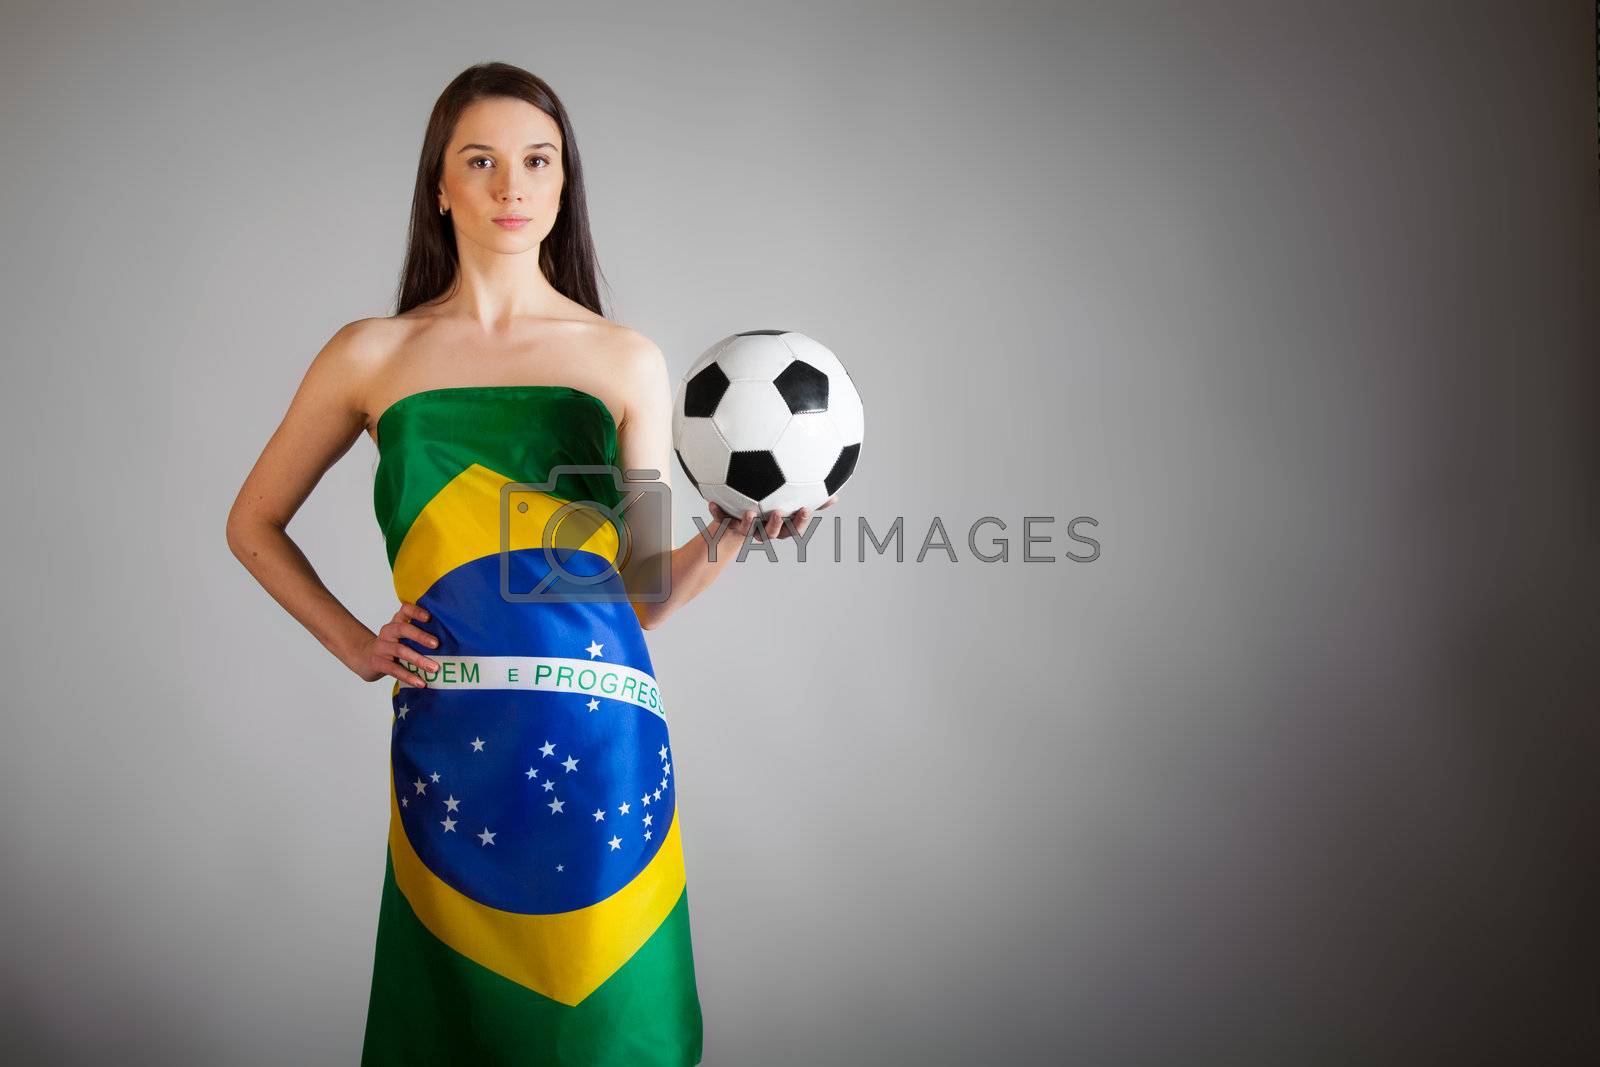 Royalty free image of woman in the Brazilian flag and soccer ball by TpaBMa